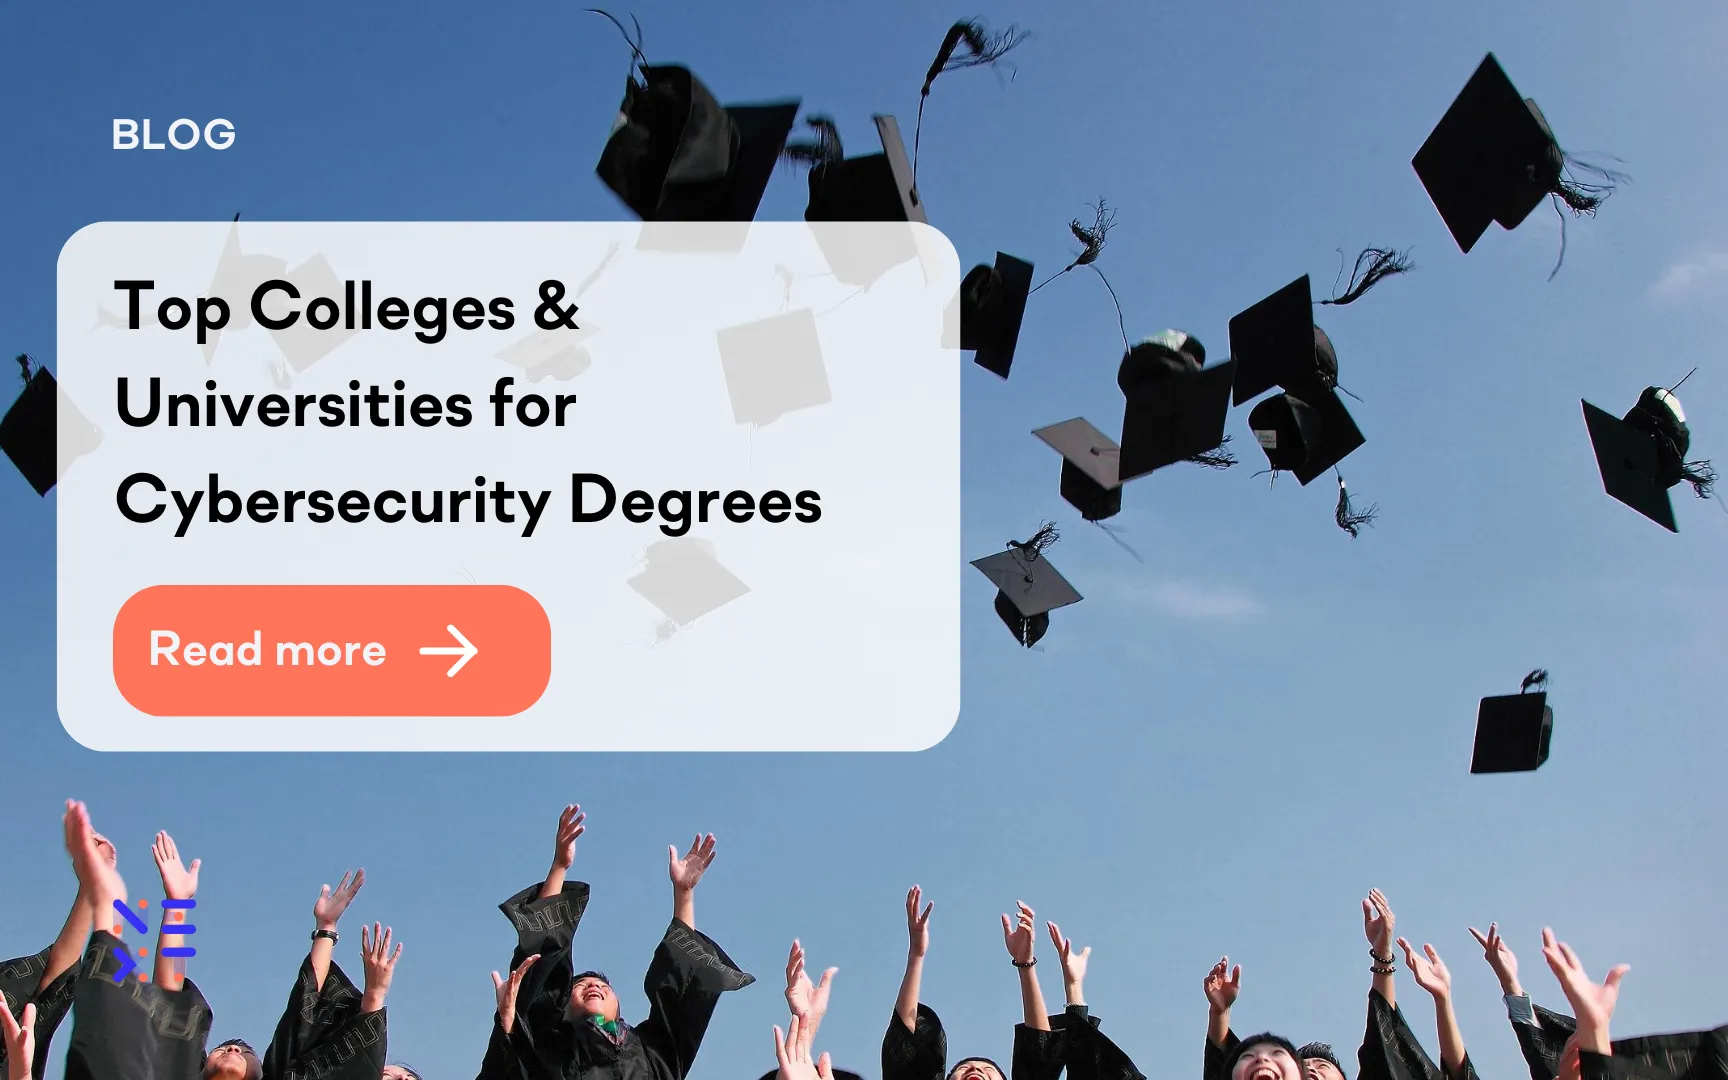 Top Colleges & Universities for Cybersecurity Degrees